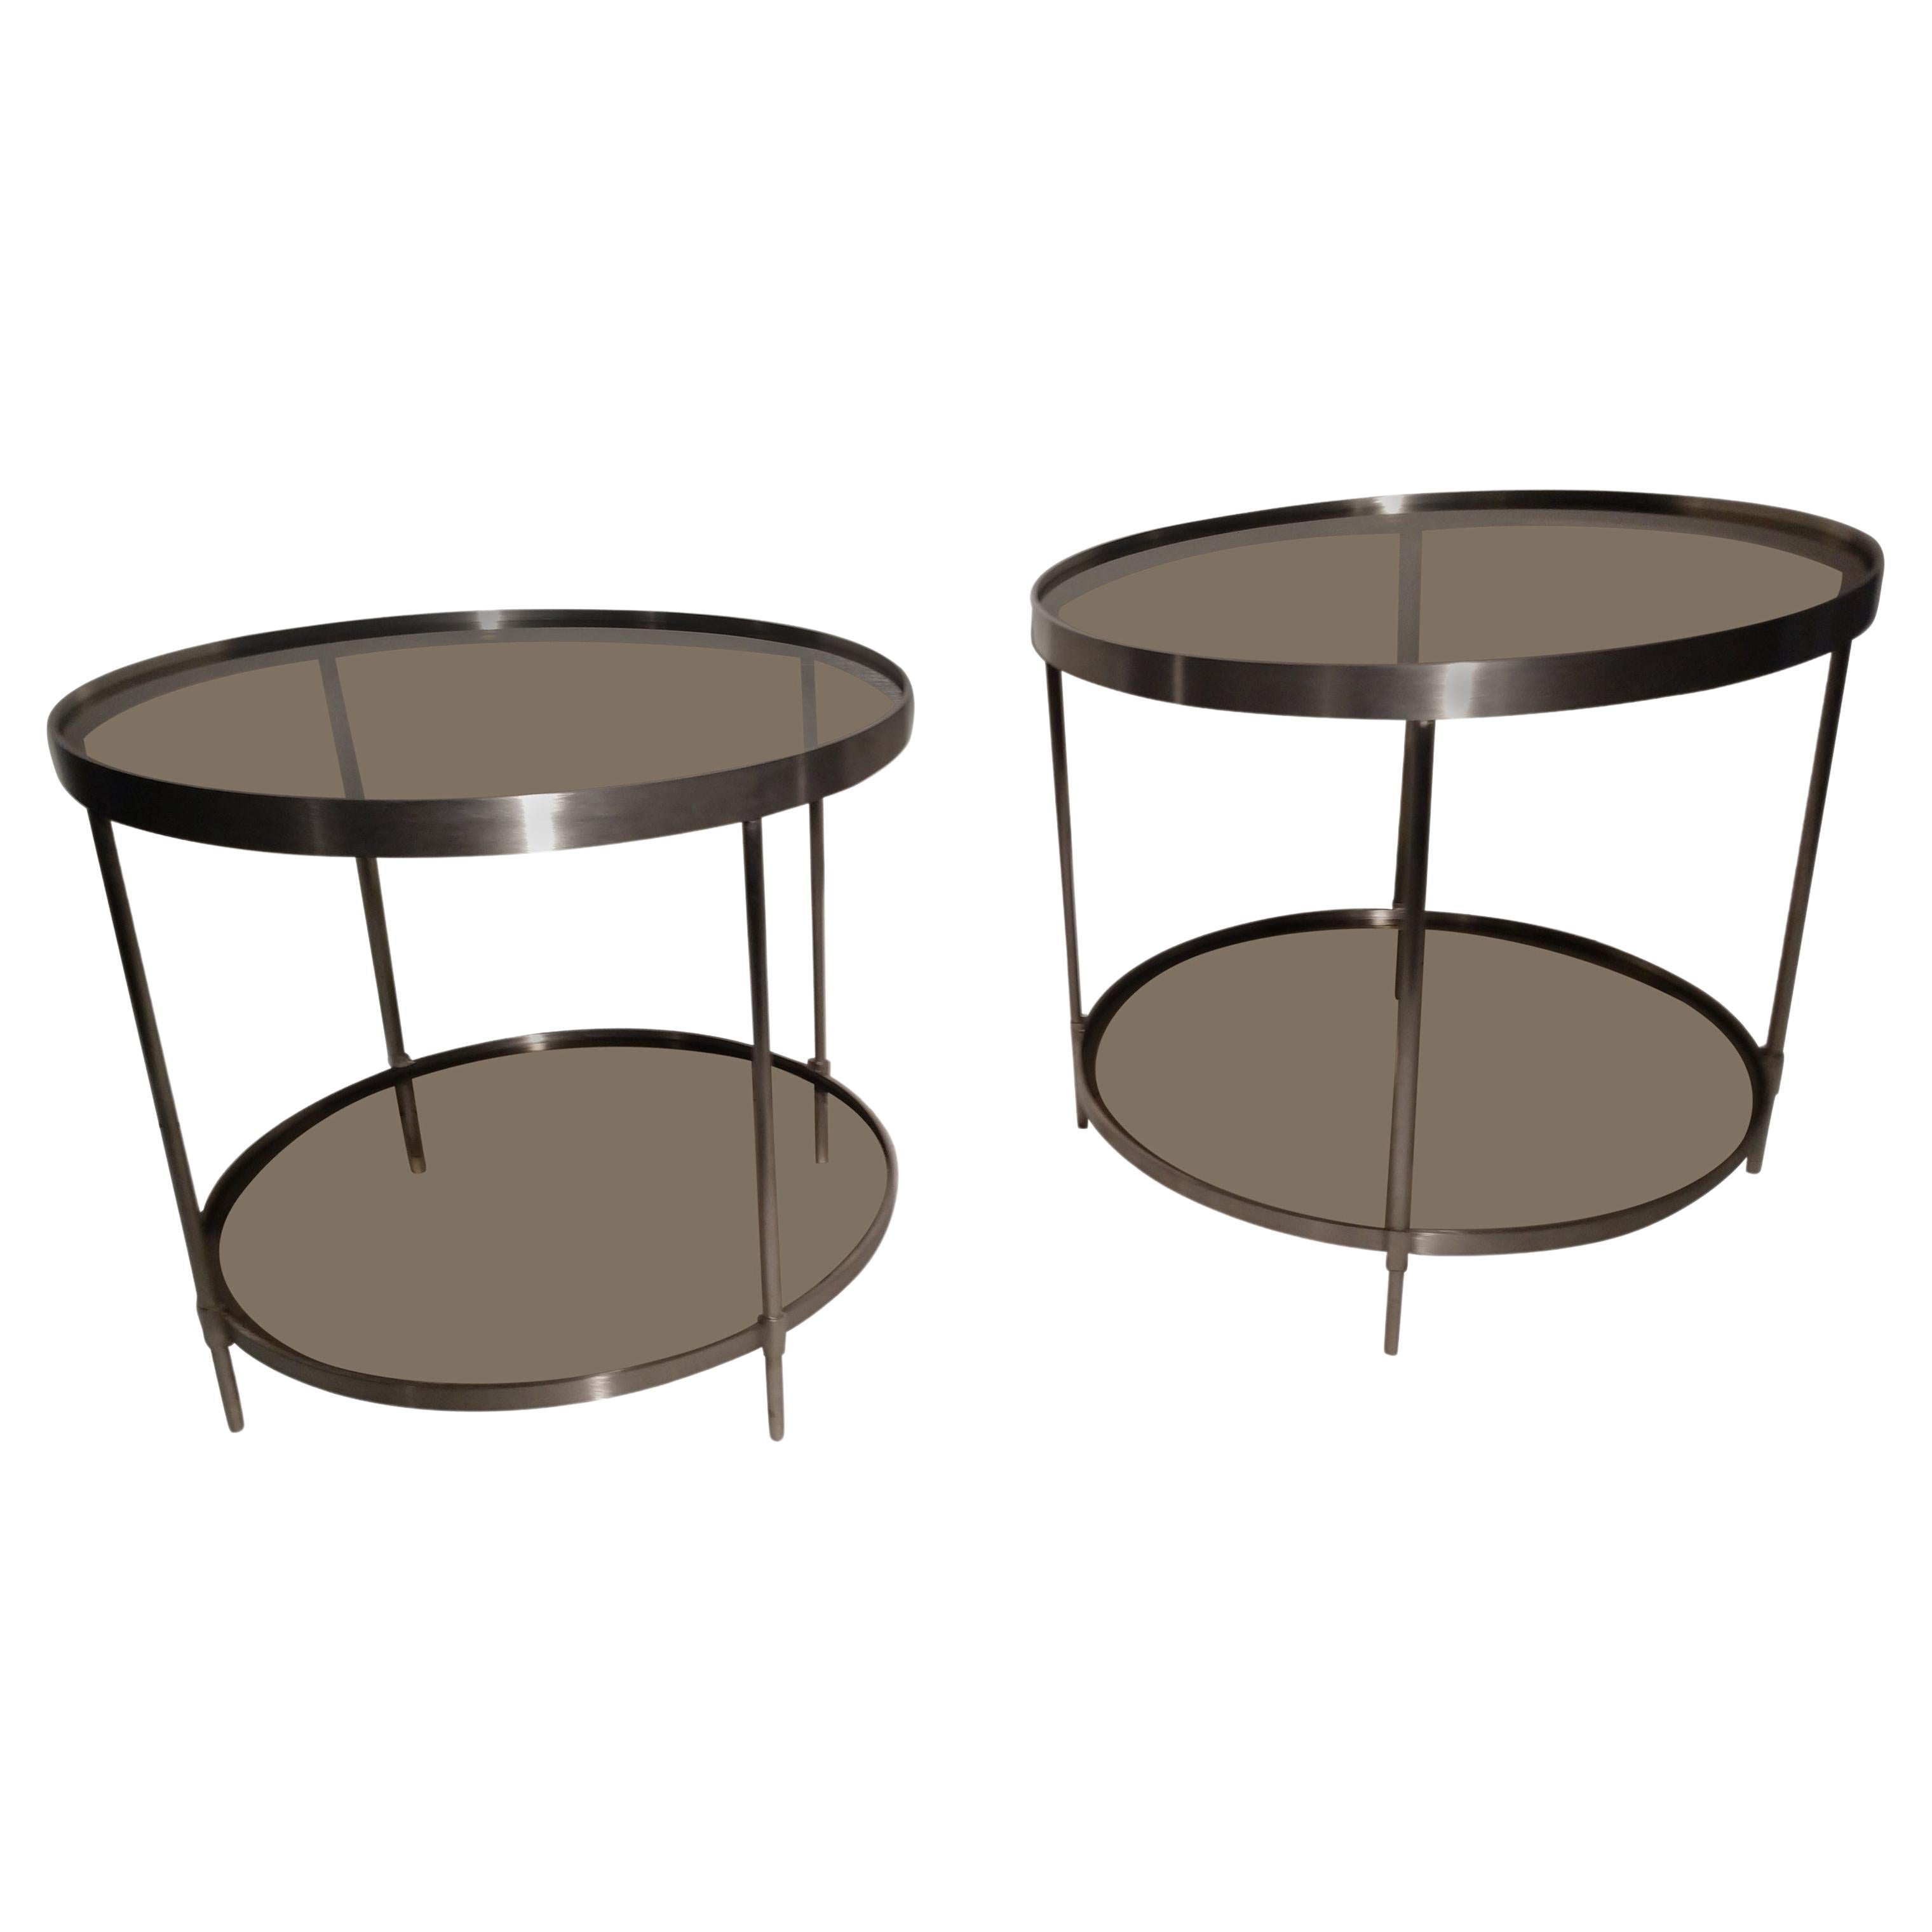 Pair of Mid Century Modern Stainless Steel Round End Tables with Smoked Glass